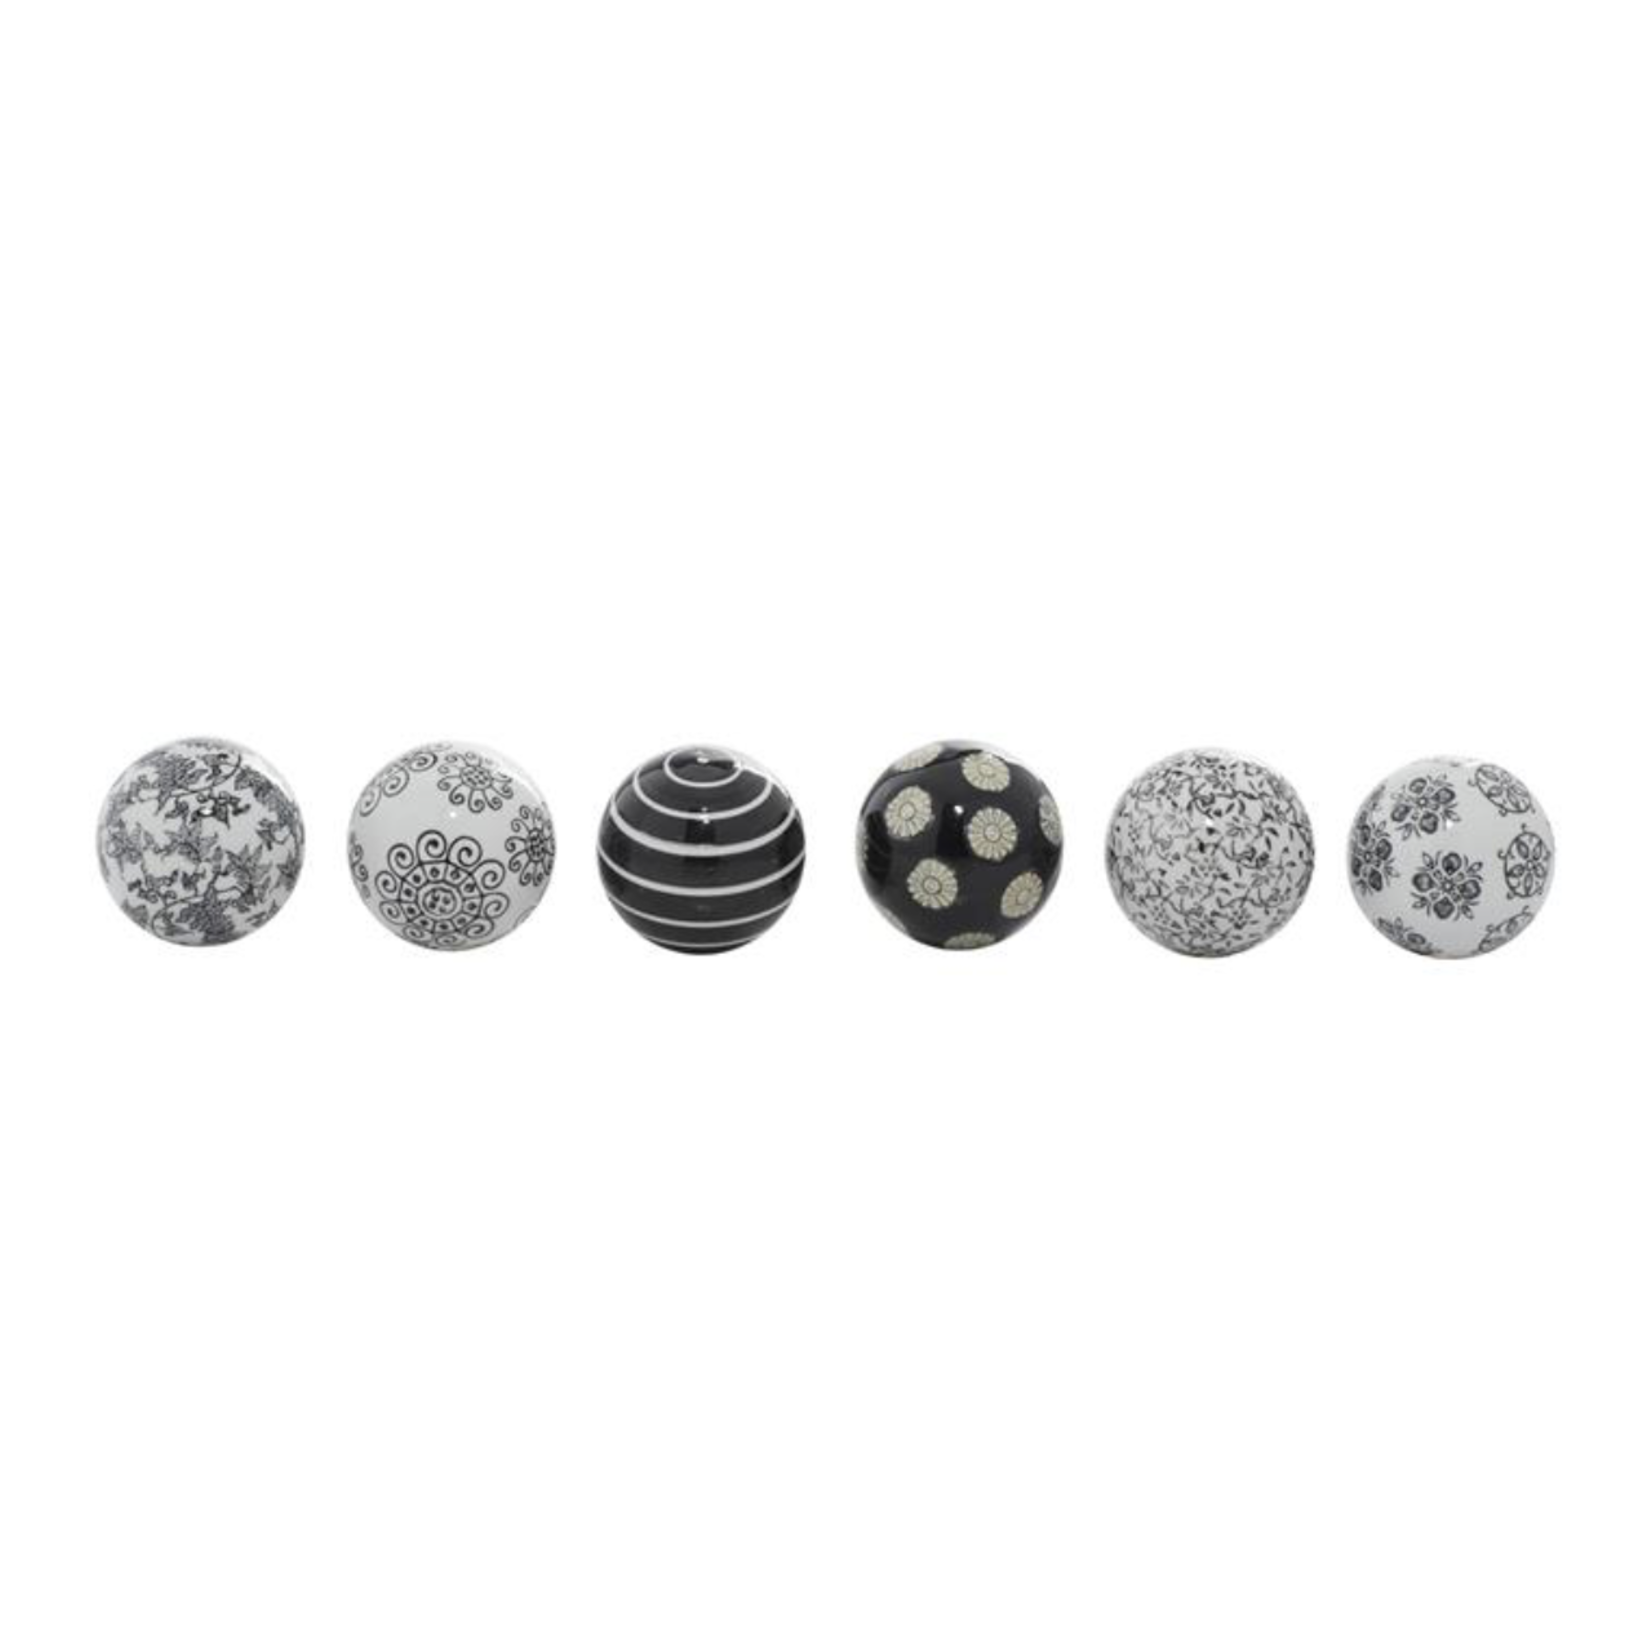 3”d BLACK CERAMIC HANDMADE GLOSSY DECORATIVE BALL ORBS & VASE FILLER WITH VARYING PATTERNS (price per each, box has assortment)